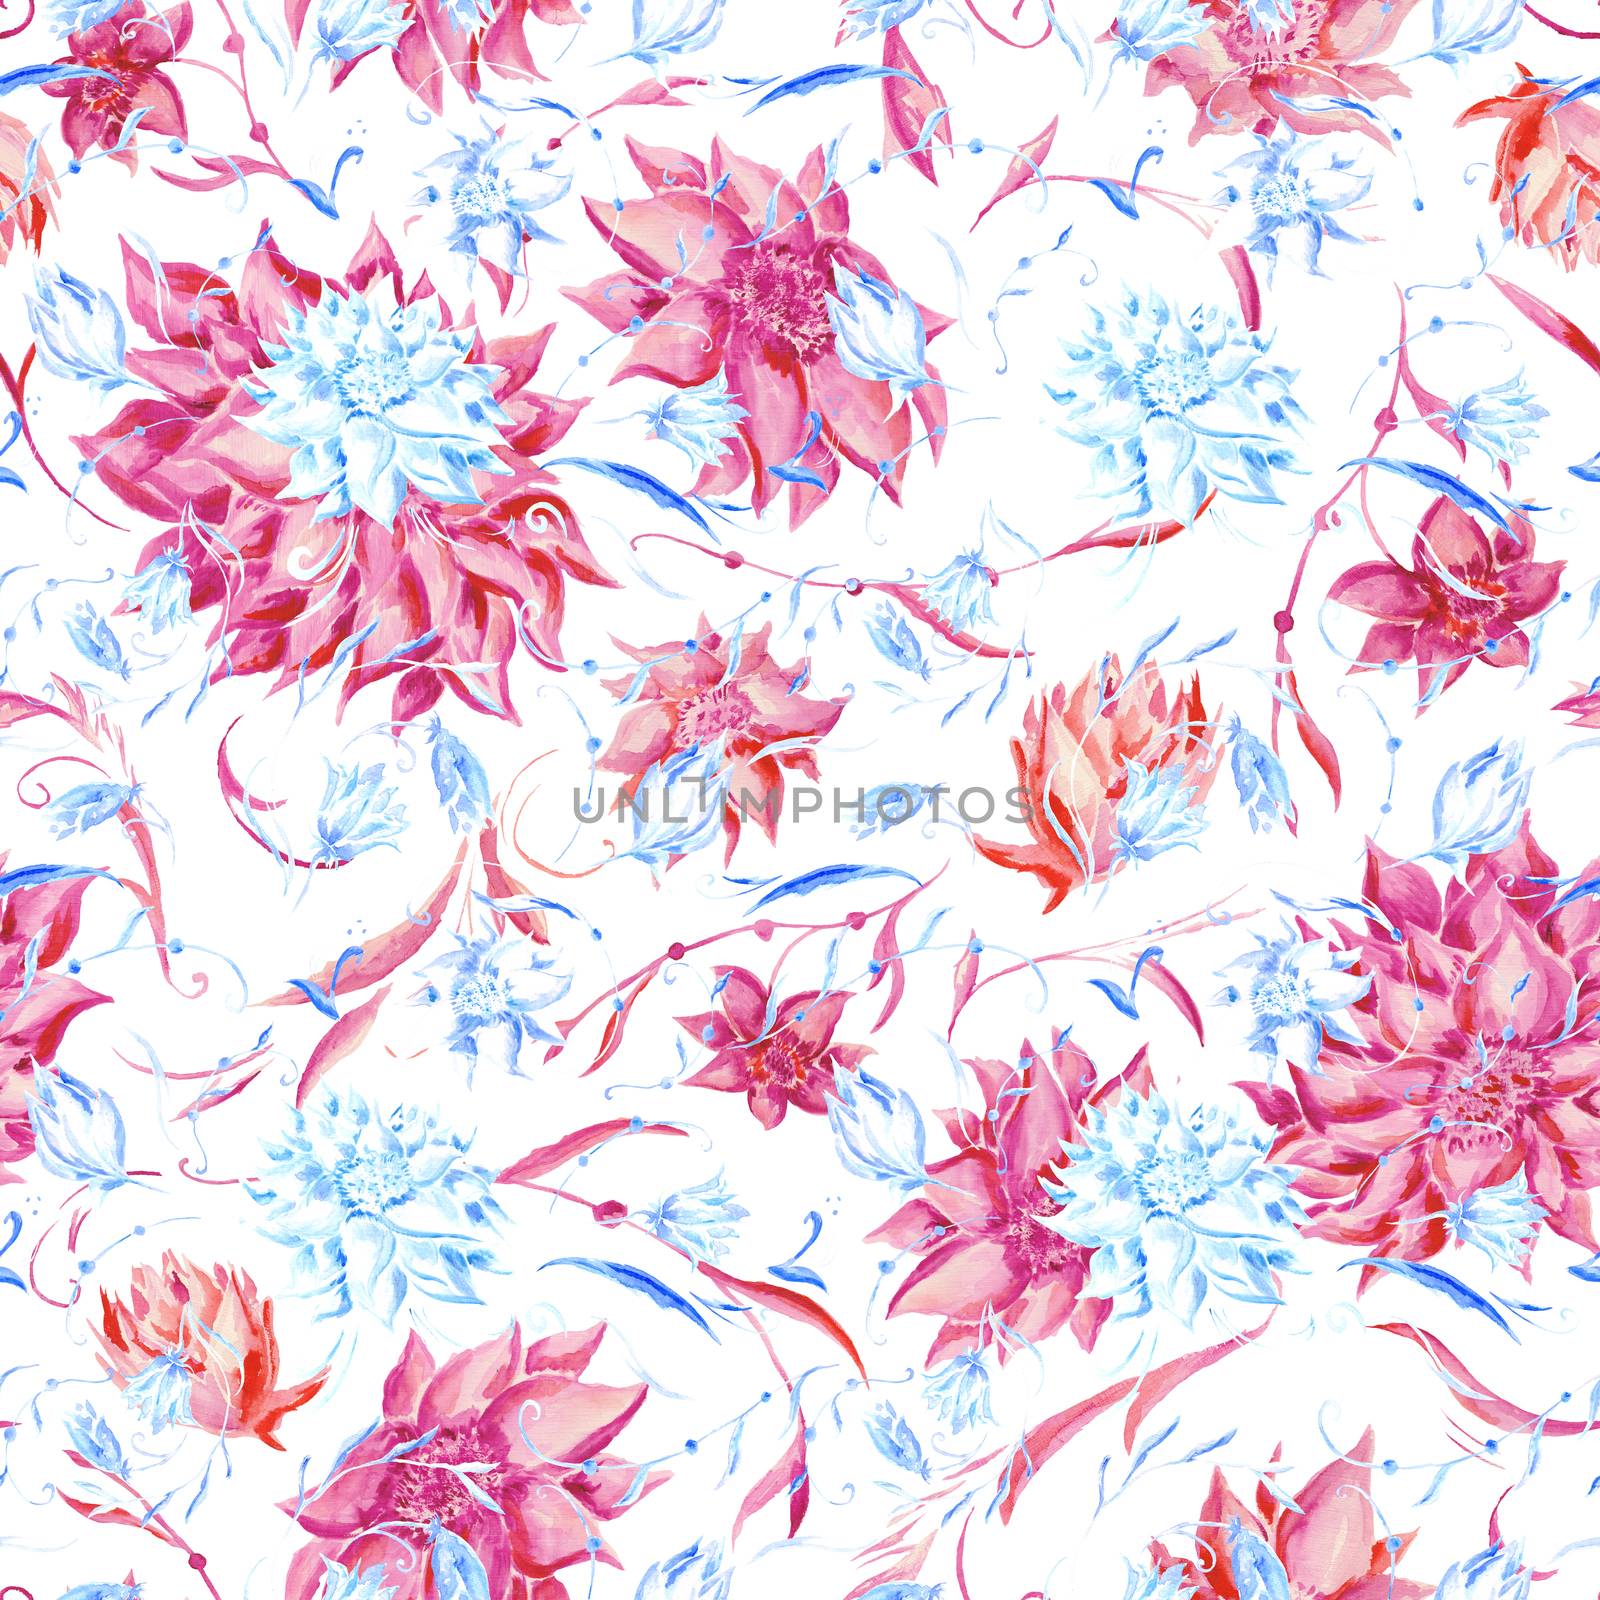 Blue and pink watercolor pattern by kisika